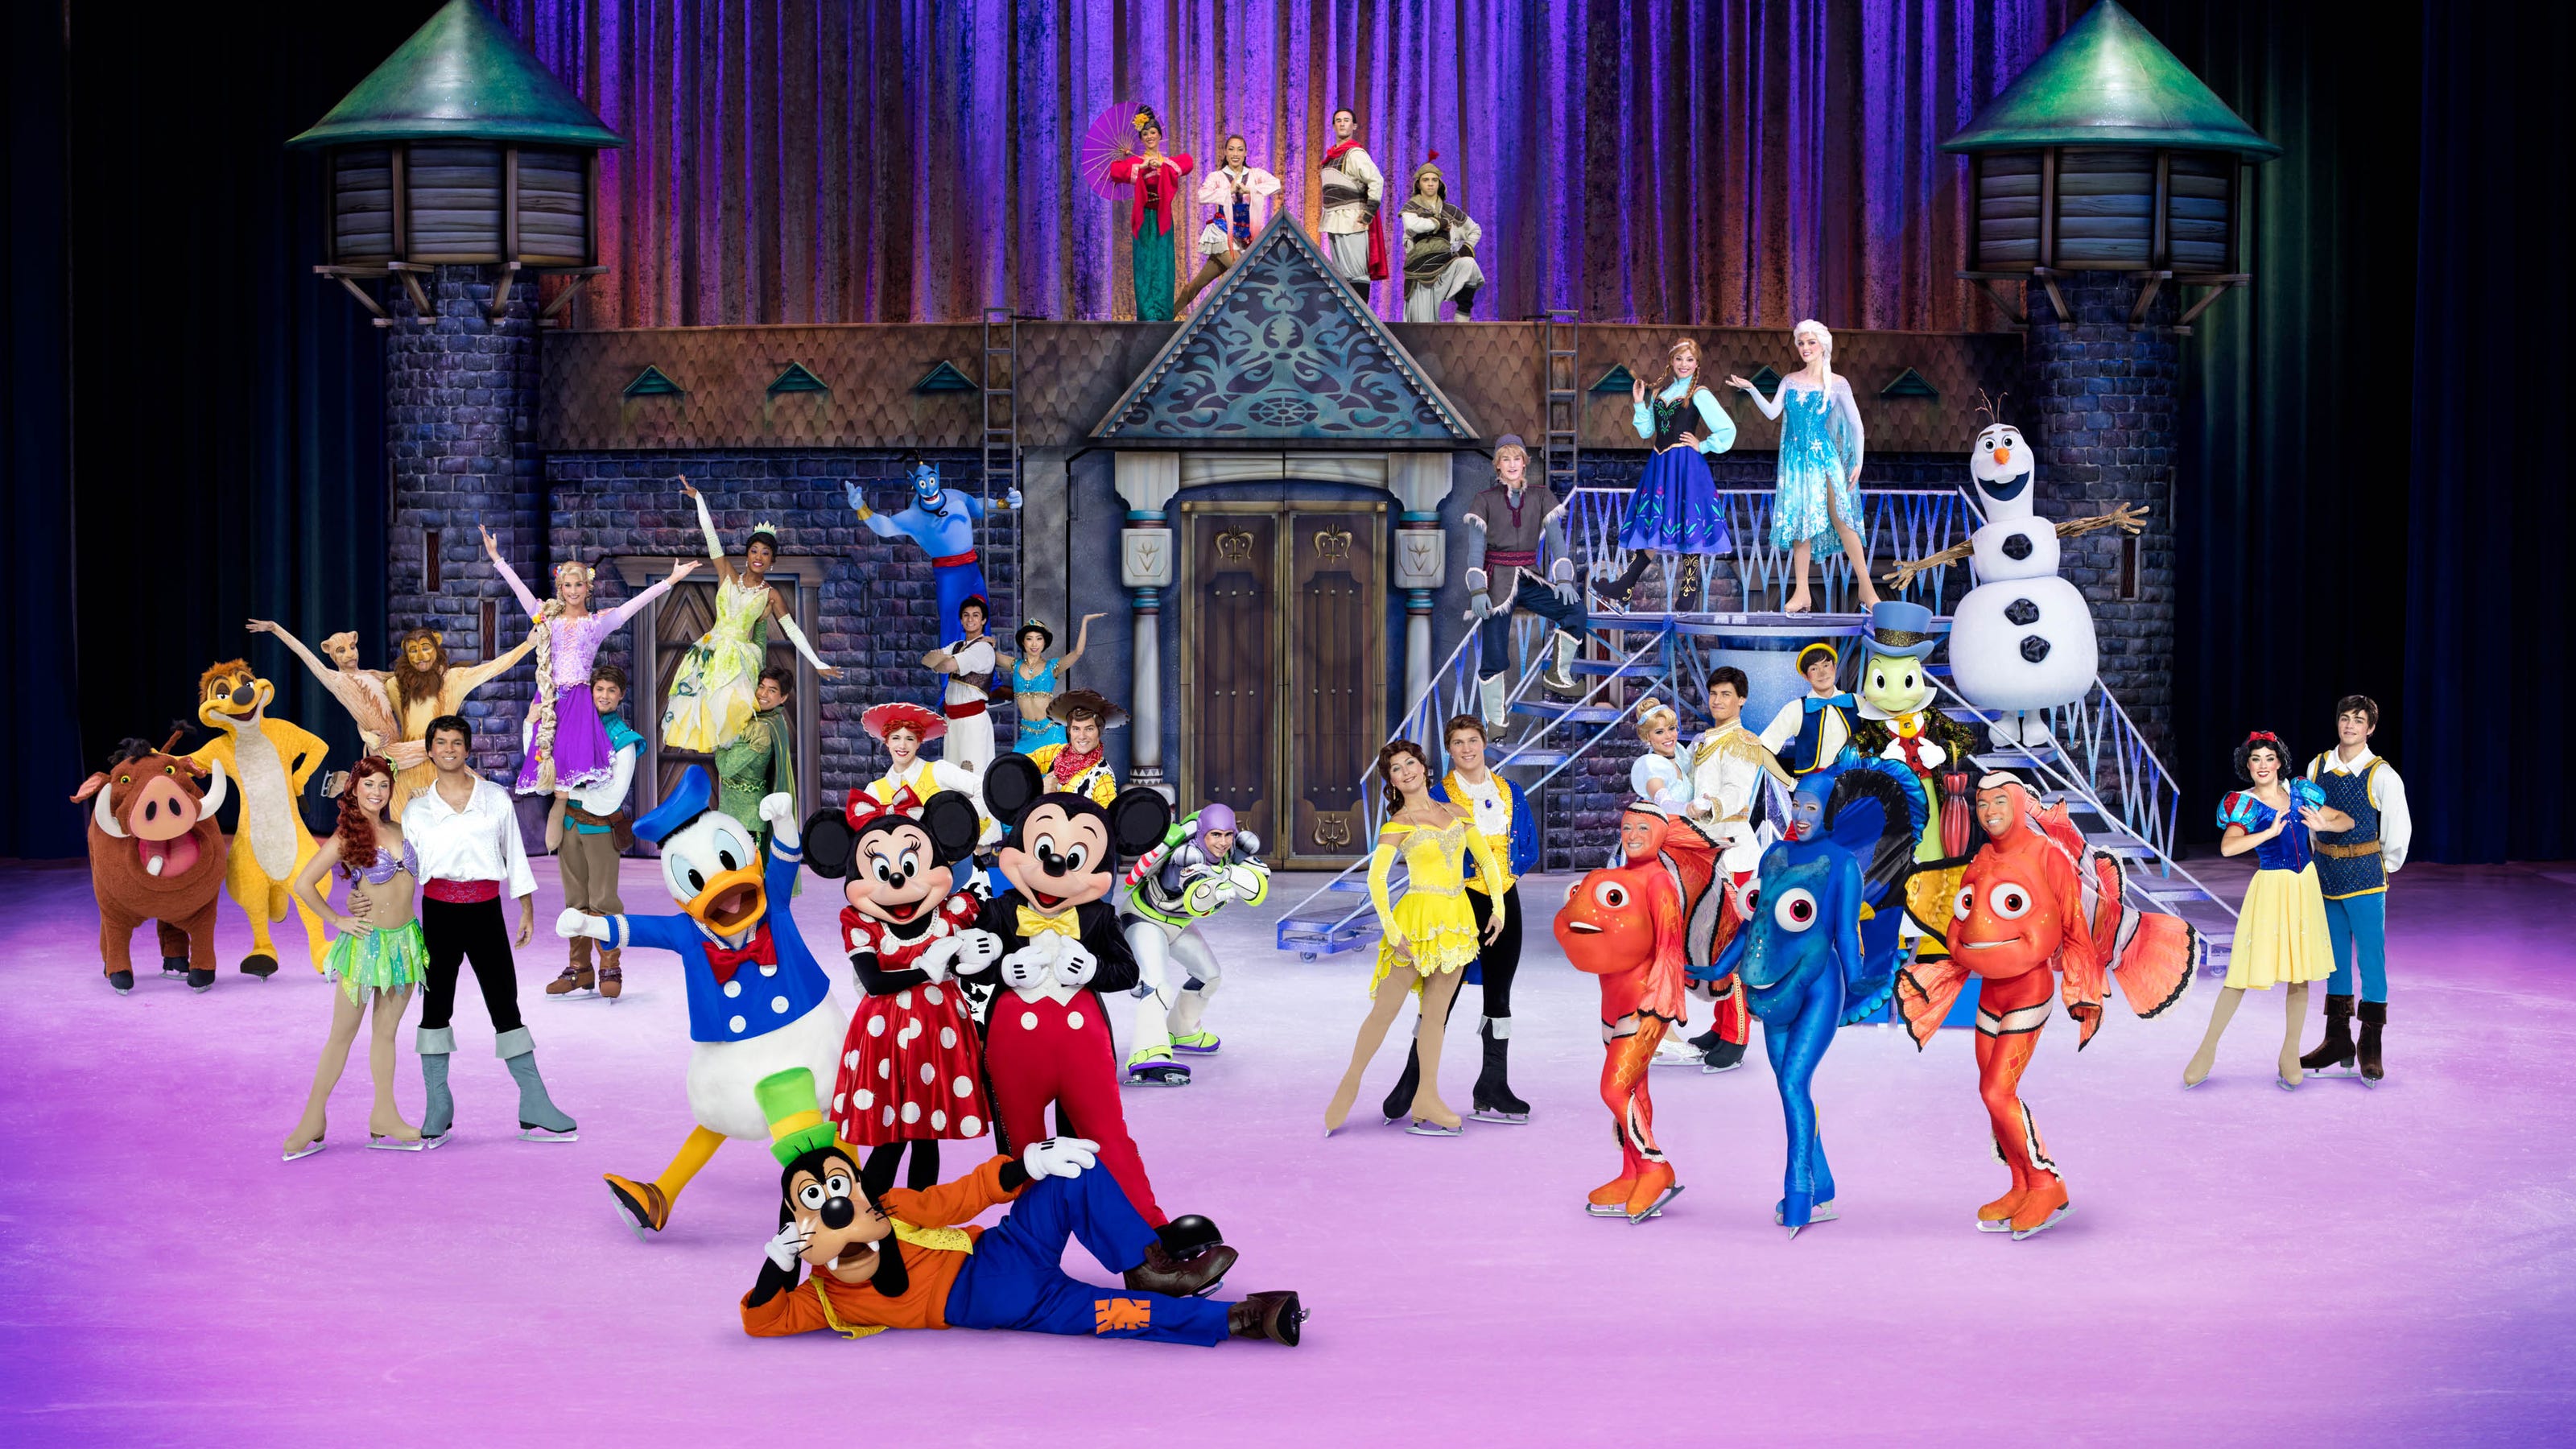 Disney on Ice celebrates '100 Years of Magic' at the Bay Center